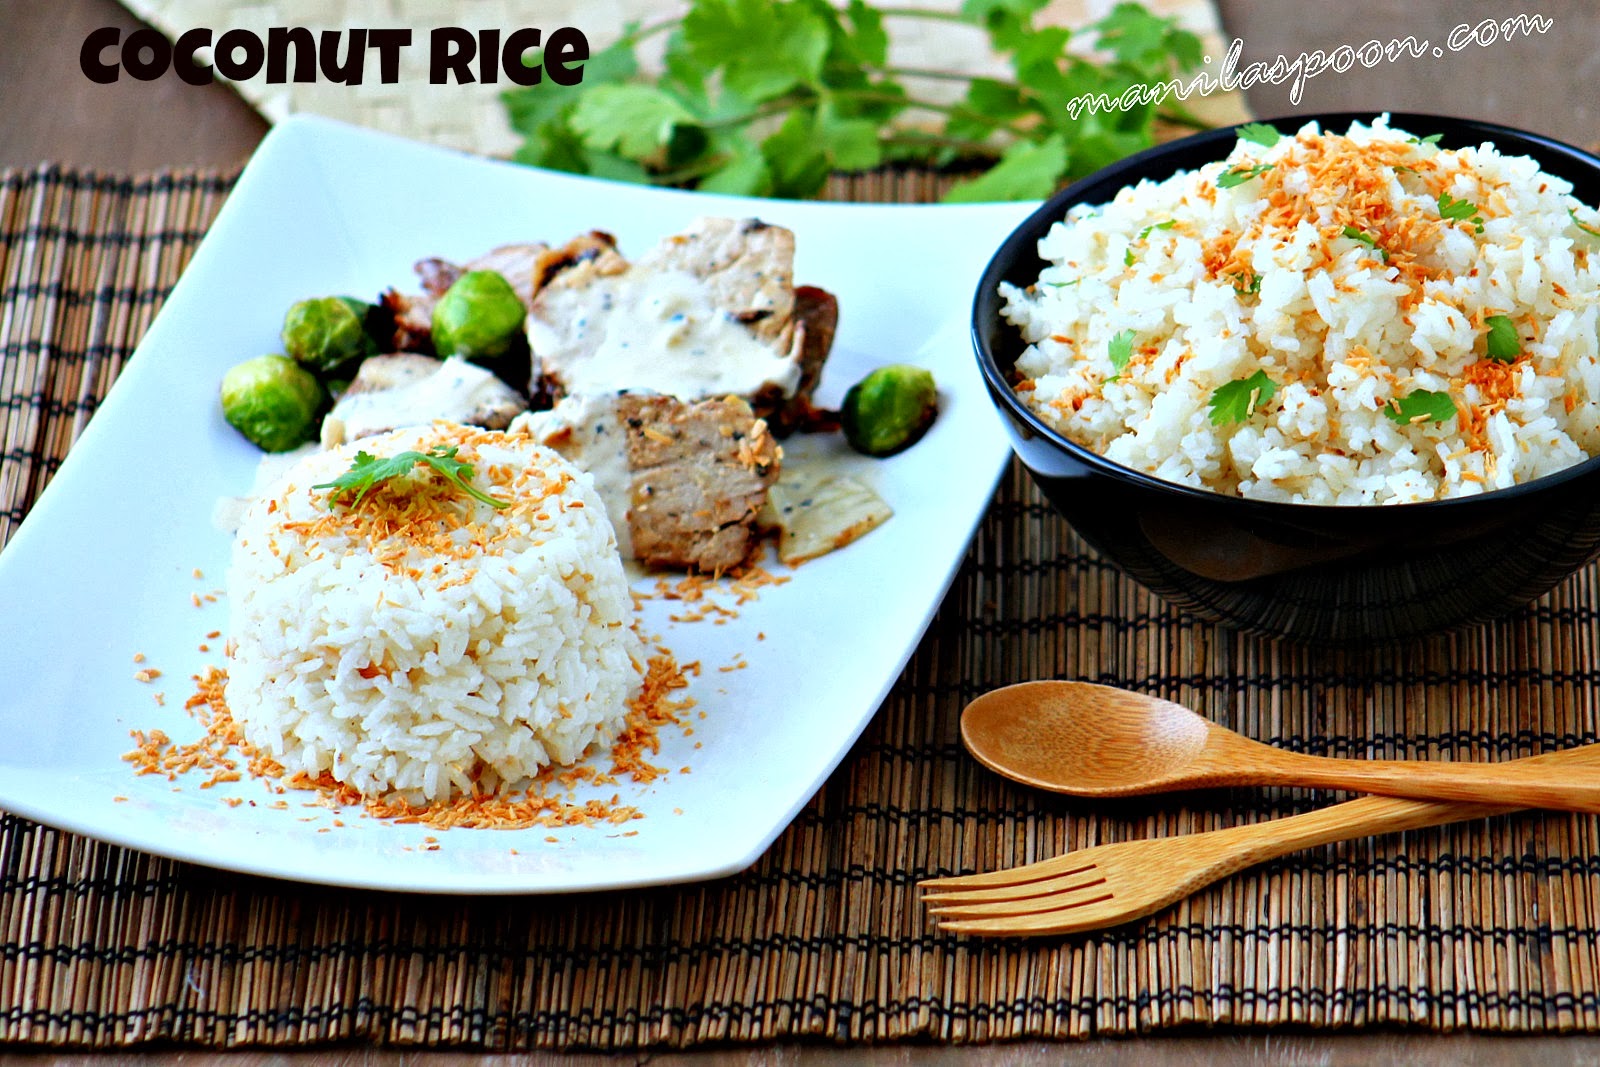 This coconut-flavored rice is deliciously healthy and a great and versatile side dish!!